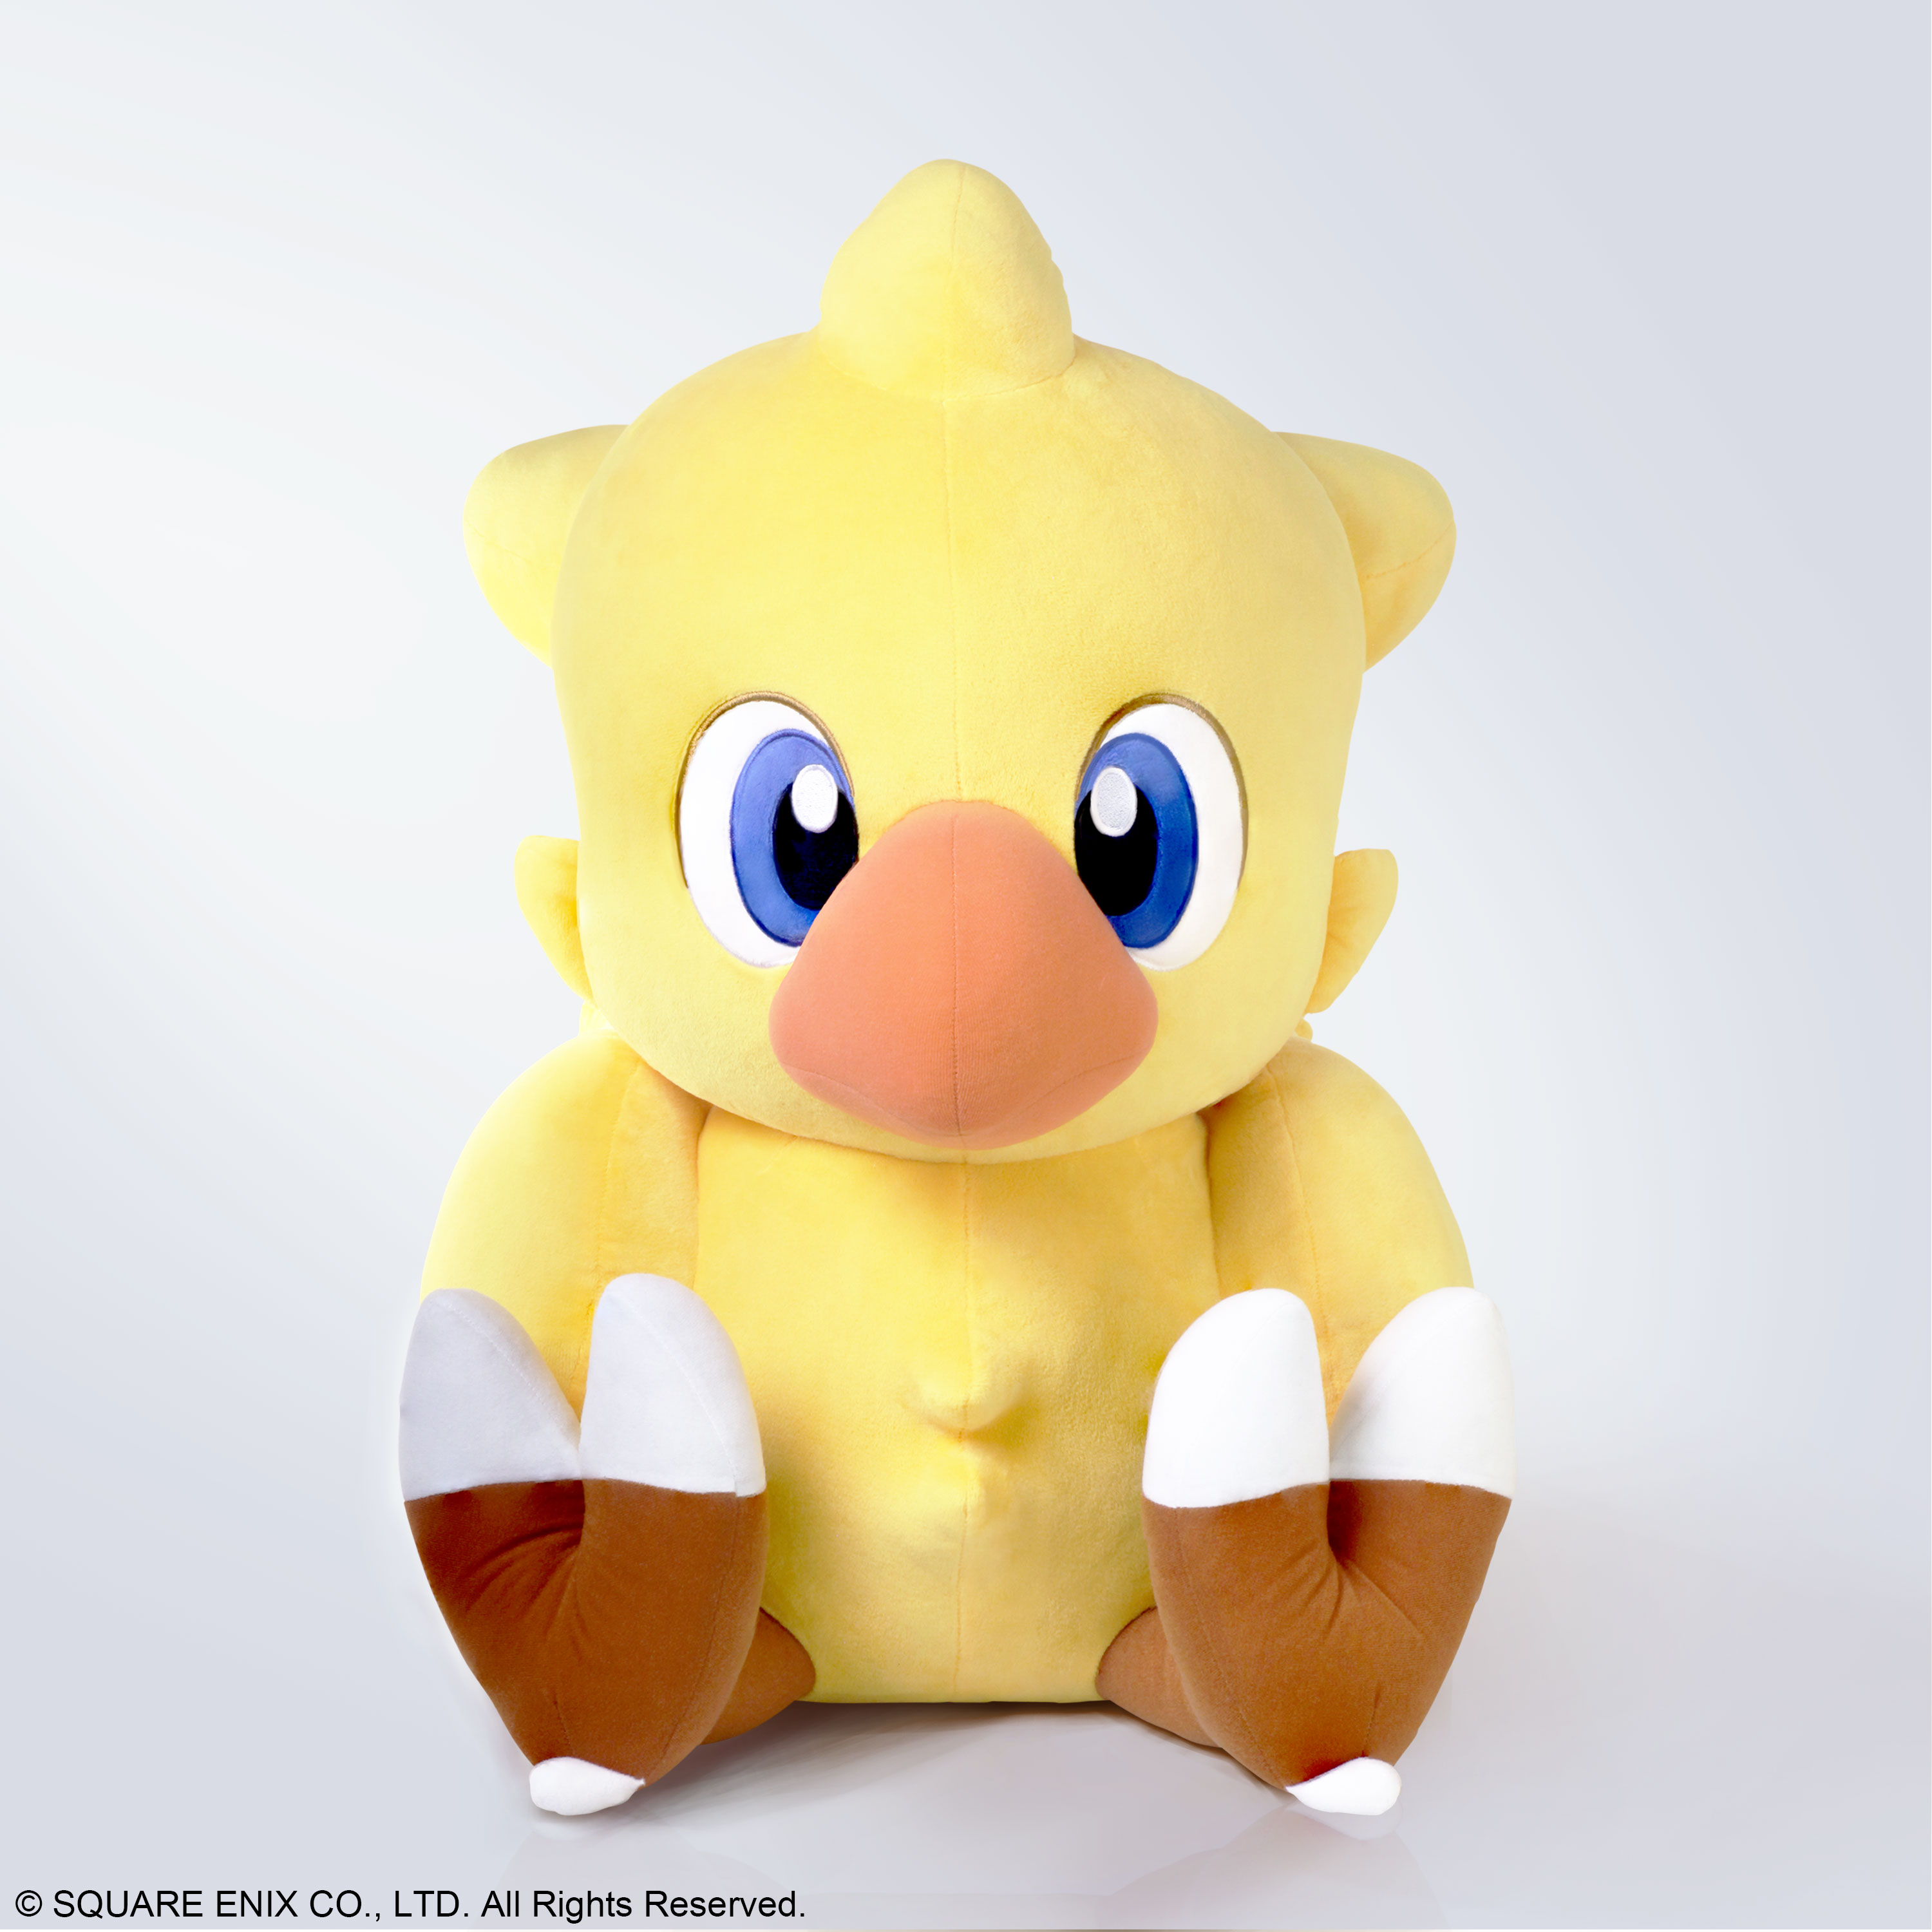 NEW AND SEALED OFFICIAL FINAL FANTASY 30TH ANNIVERSARY CHOCOBO PLUSH SOFT TOY 